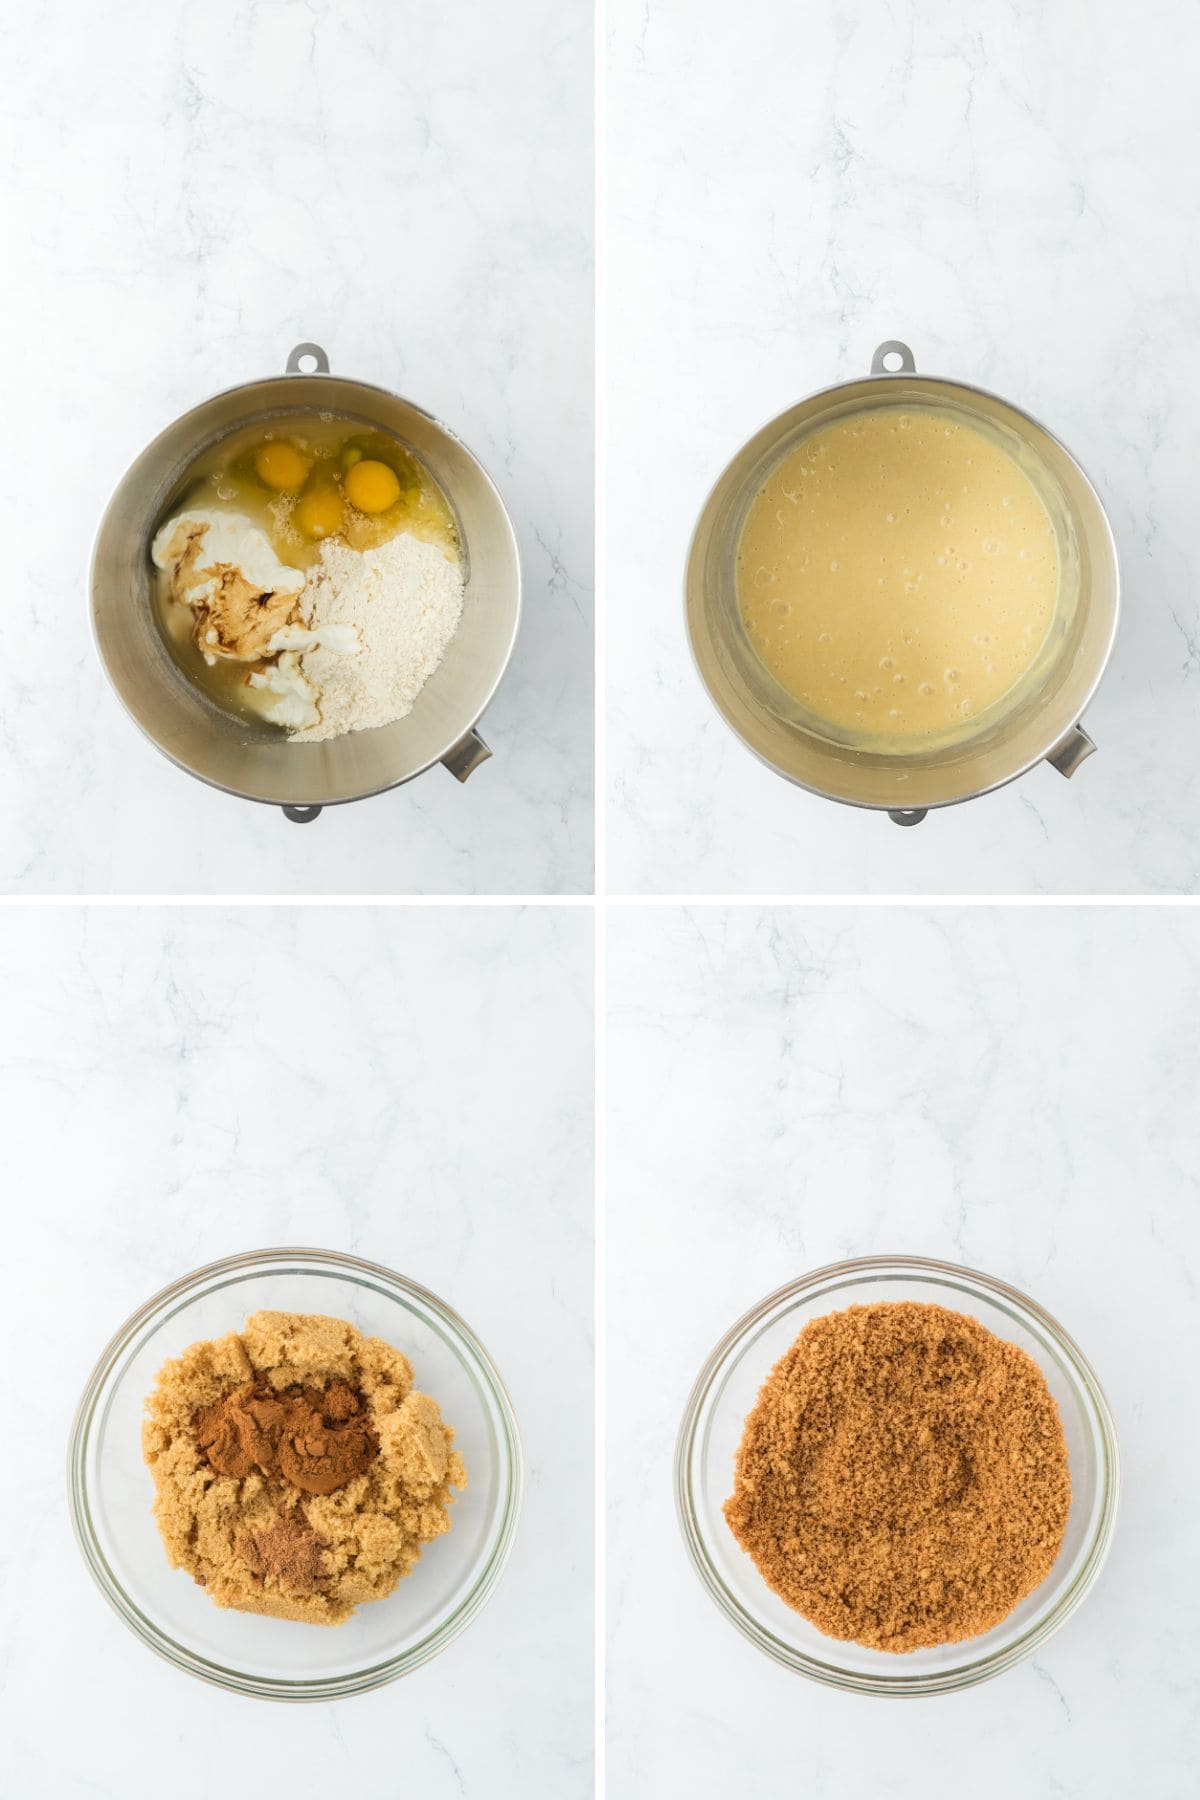 a collage of yellow cake mix before and after mixing and a brown sugar swirl being mixed in a bowl to make honeybun cake